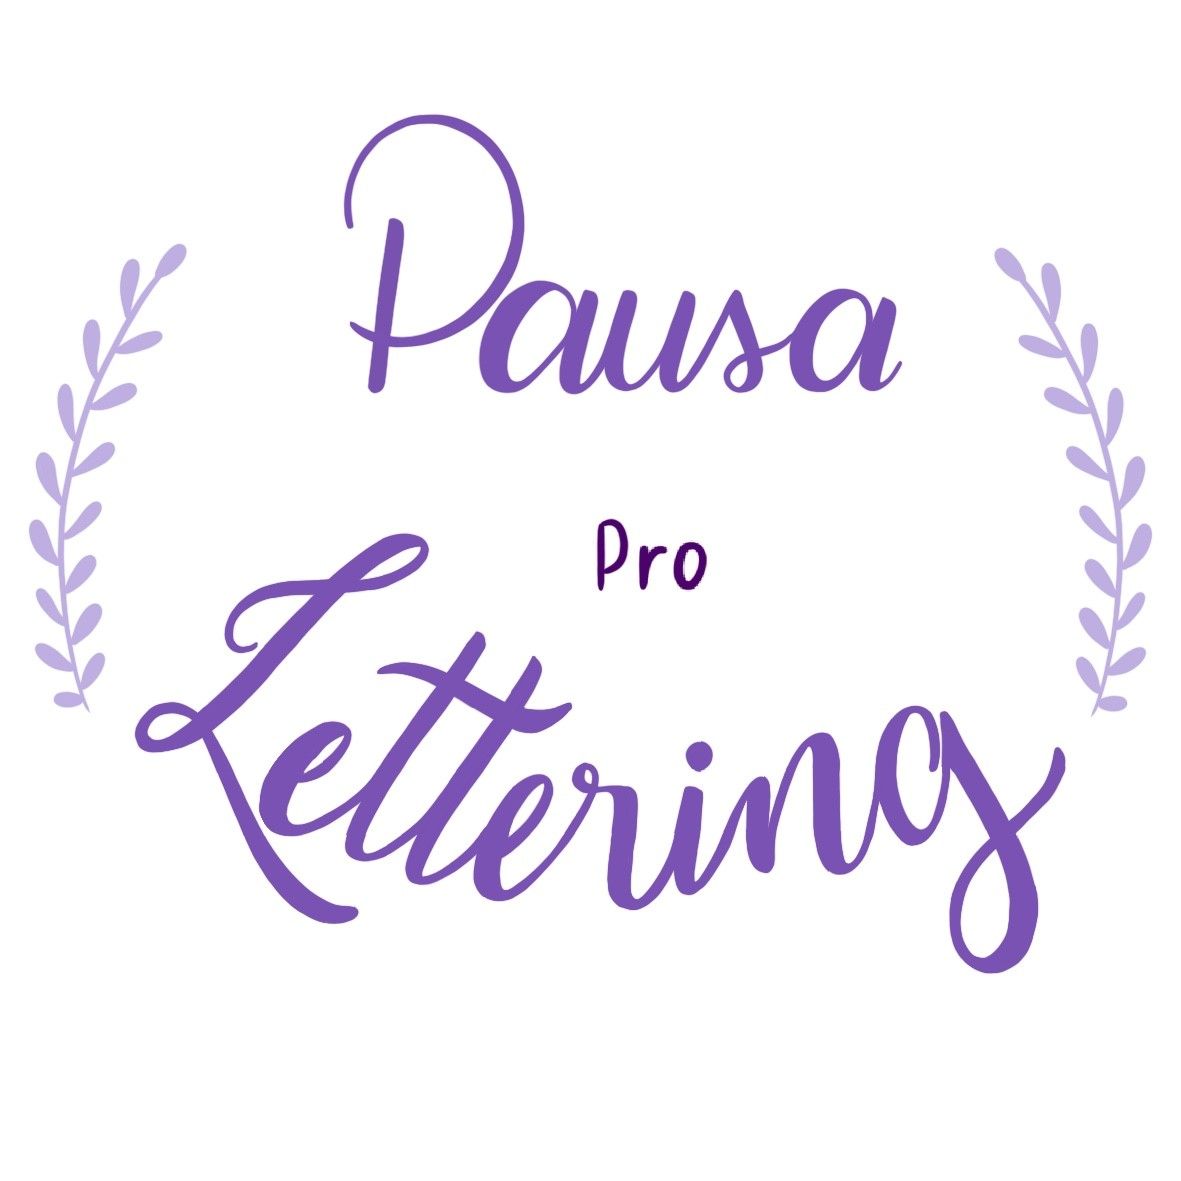 Pausa pro Lettering 